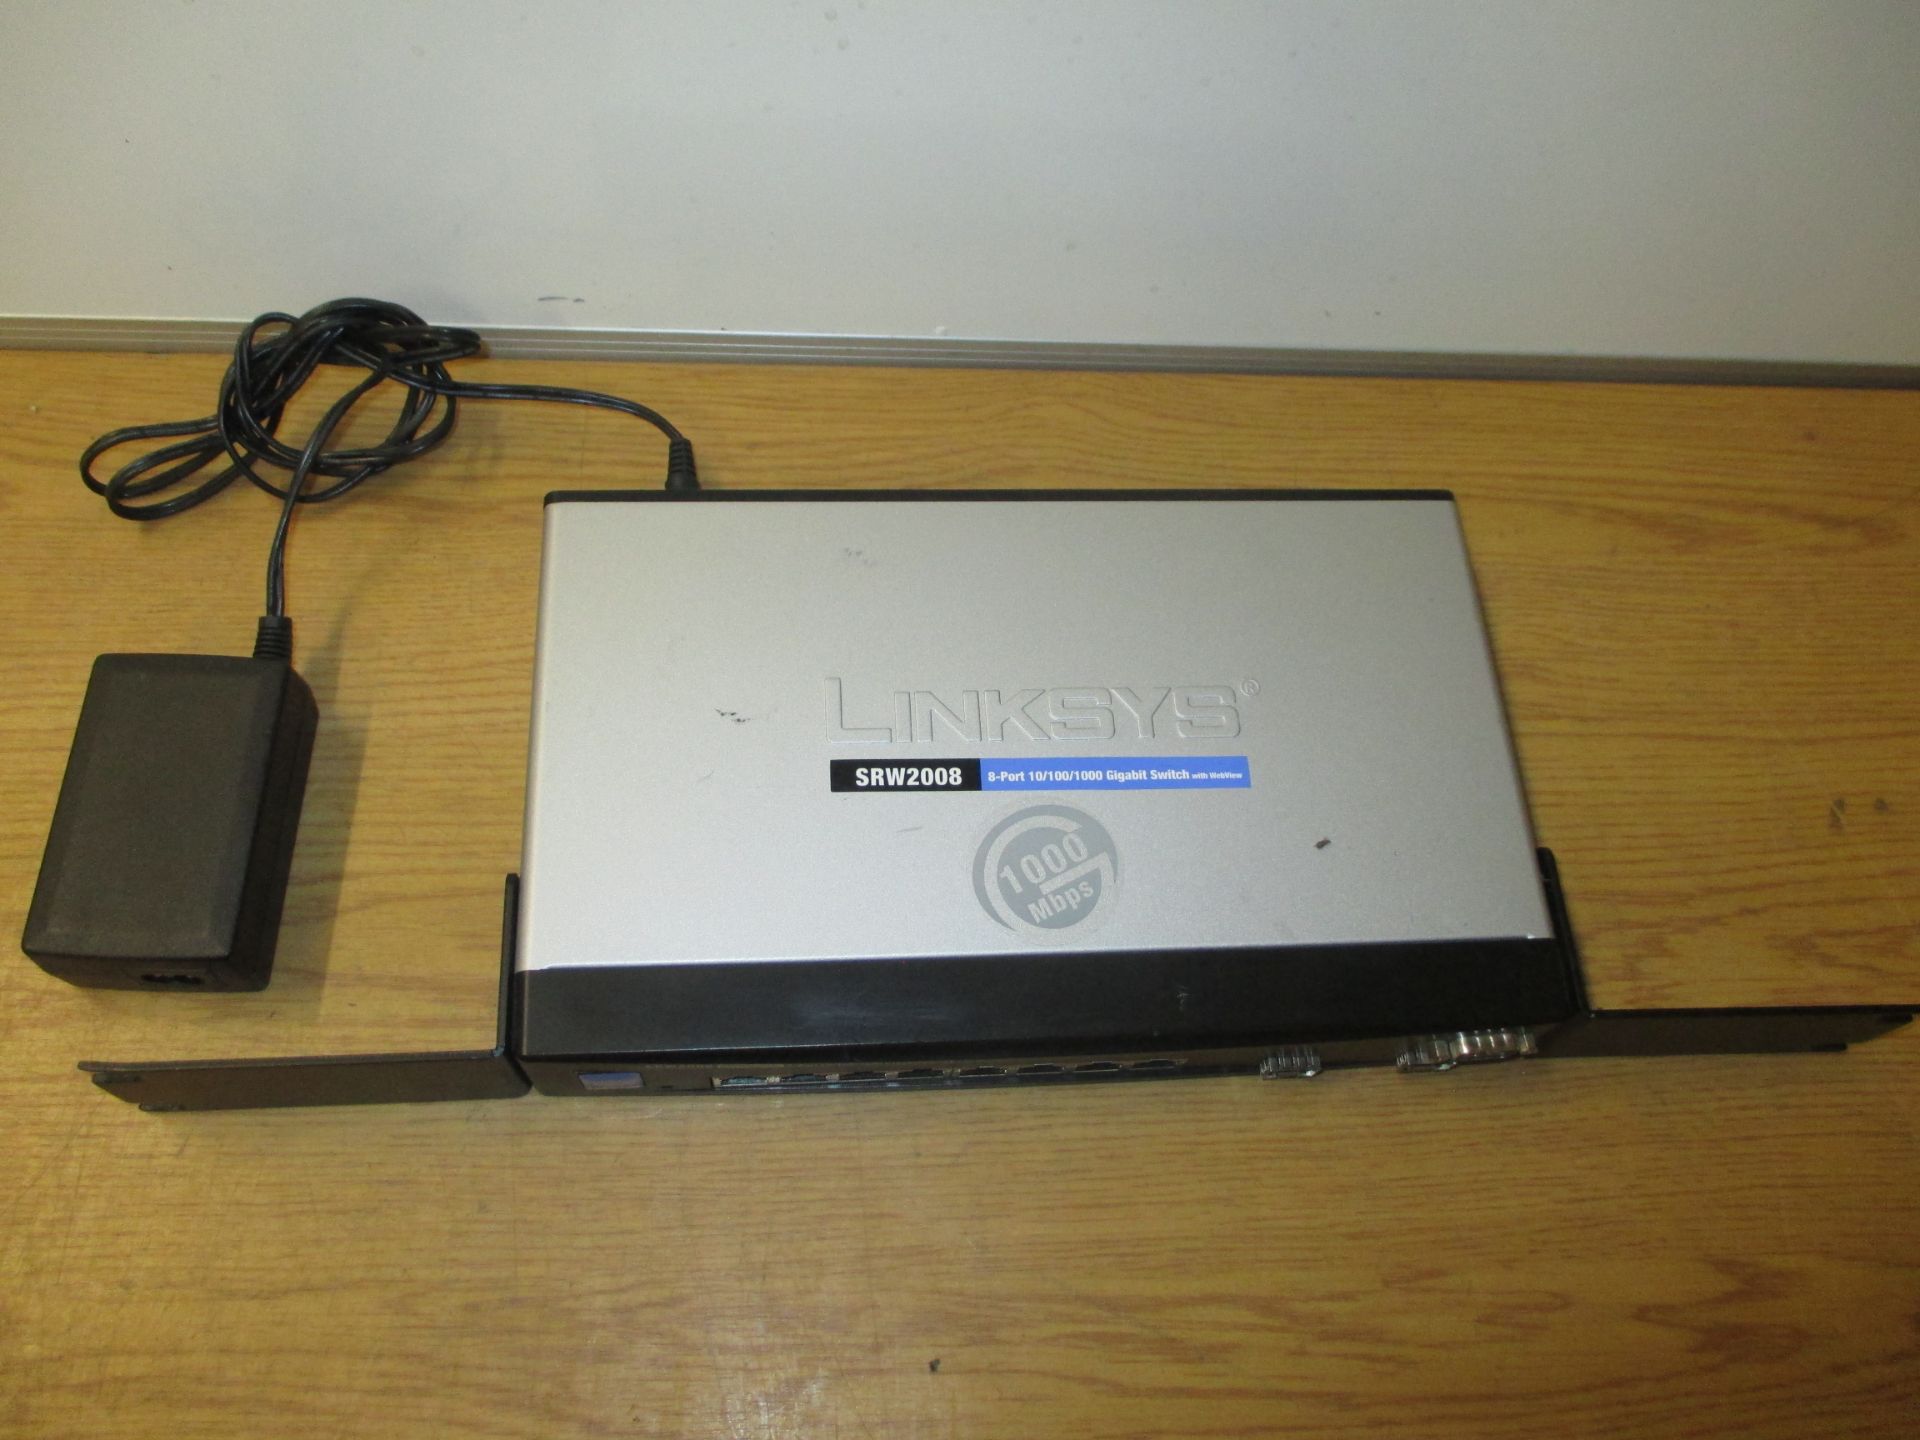 LINKSYS (CISCO) SRW2008 BUSINESS SERIES 8 PORT 10/100/1000 GIGABIT SWITCH WITH WEBVIEW. RACK - Image 2 of 3